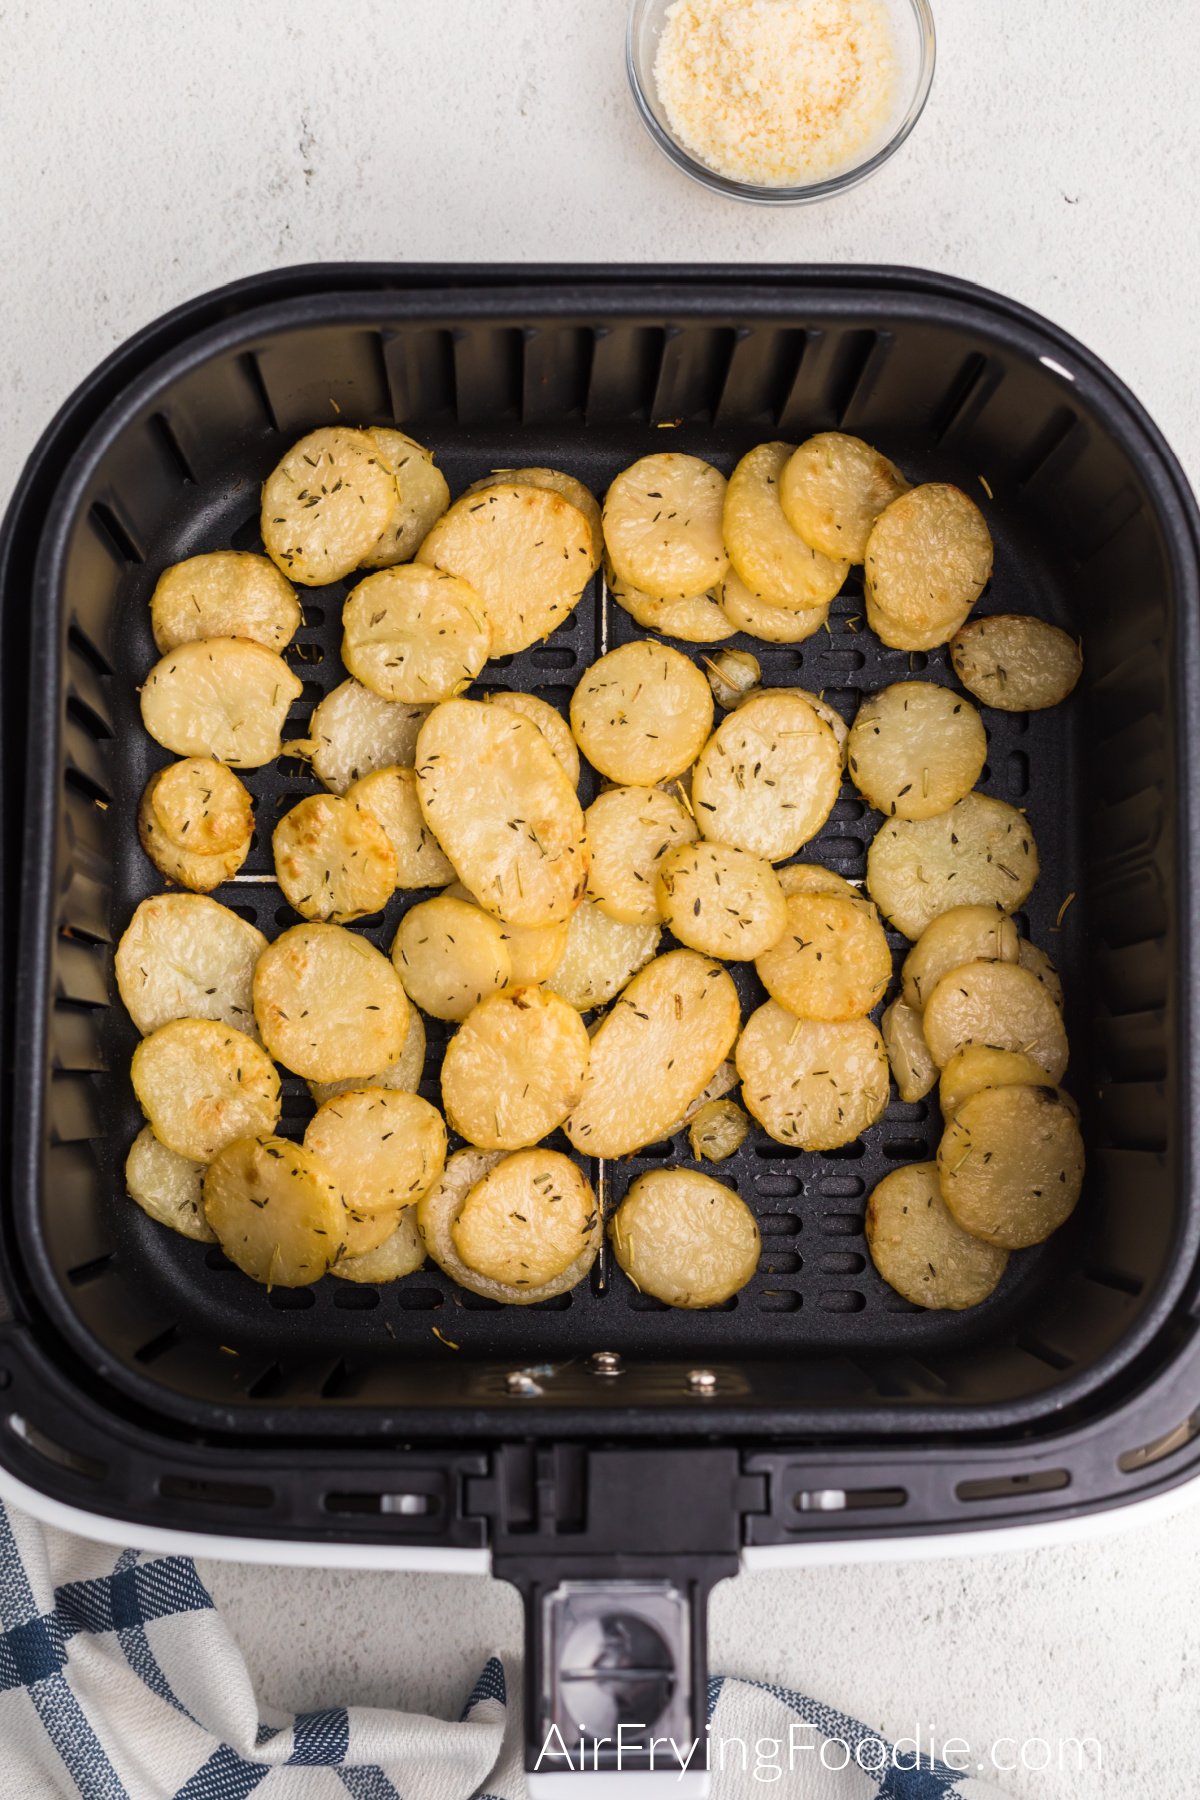 Air fried sliced potatoes in the basket of the air fryer.